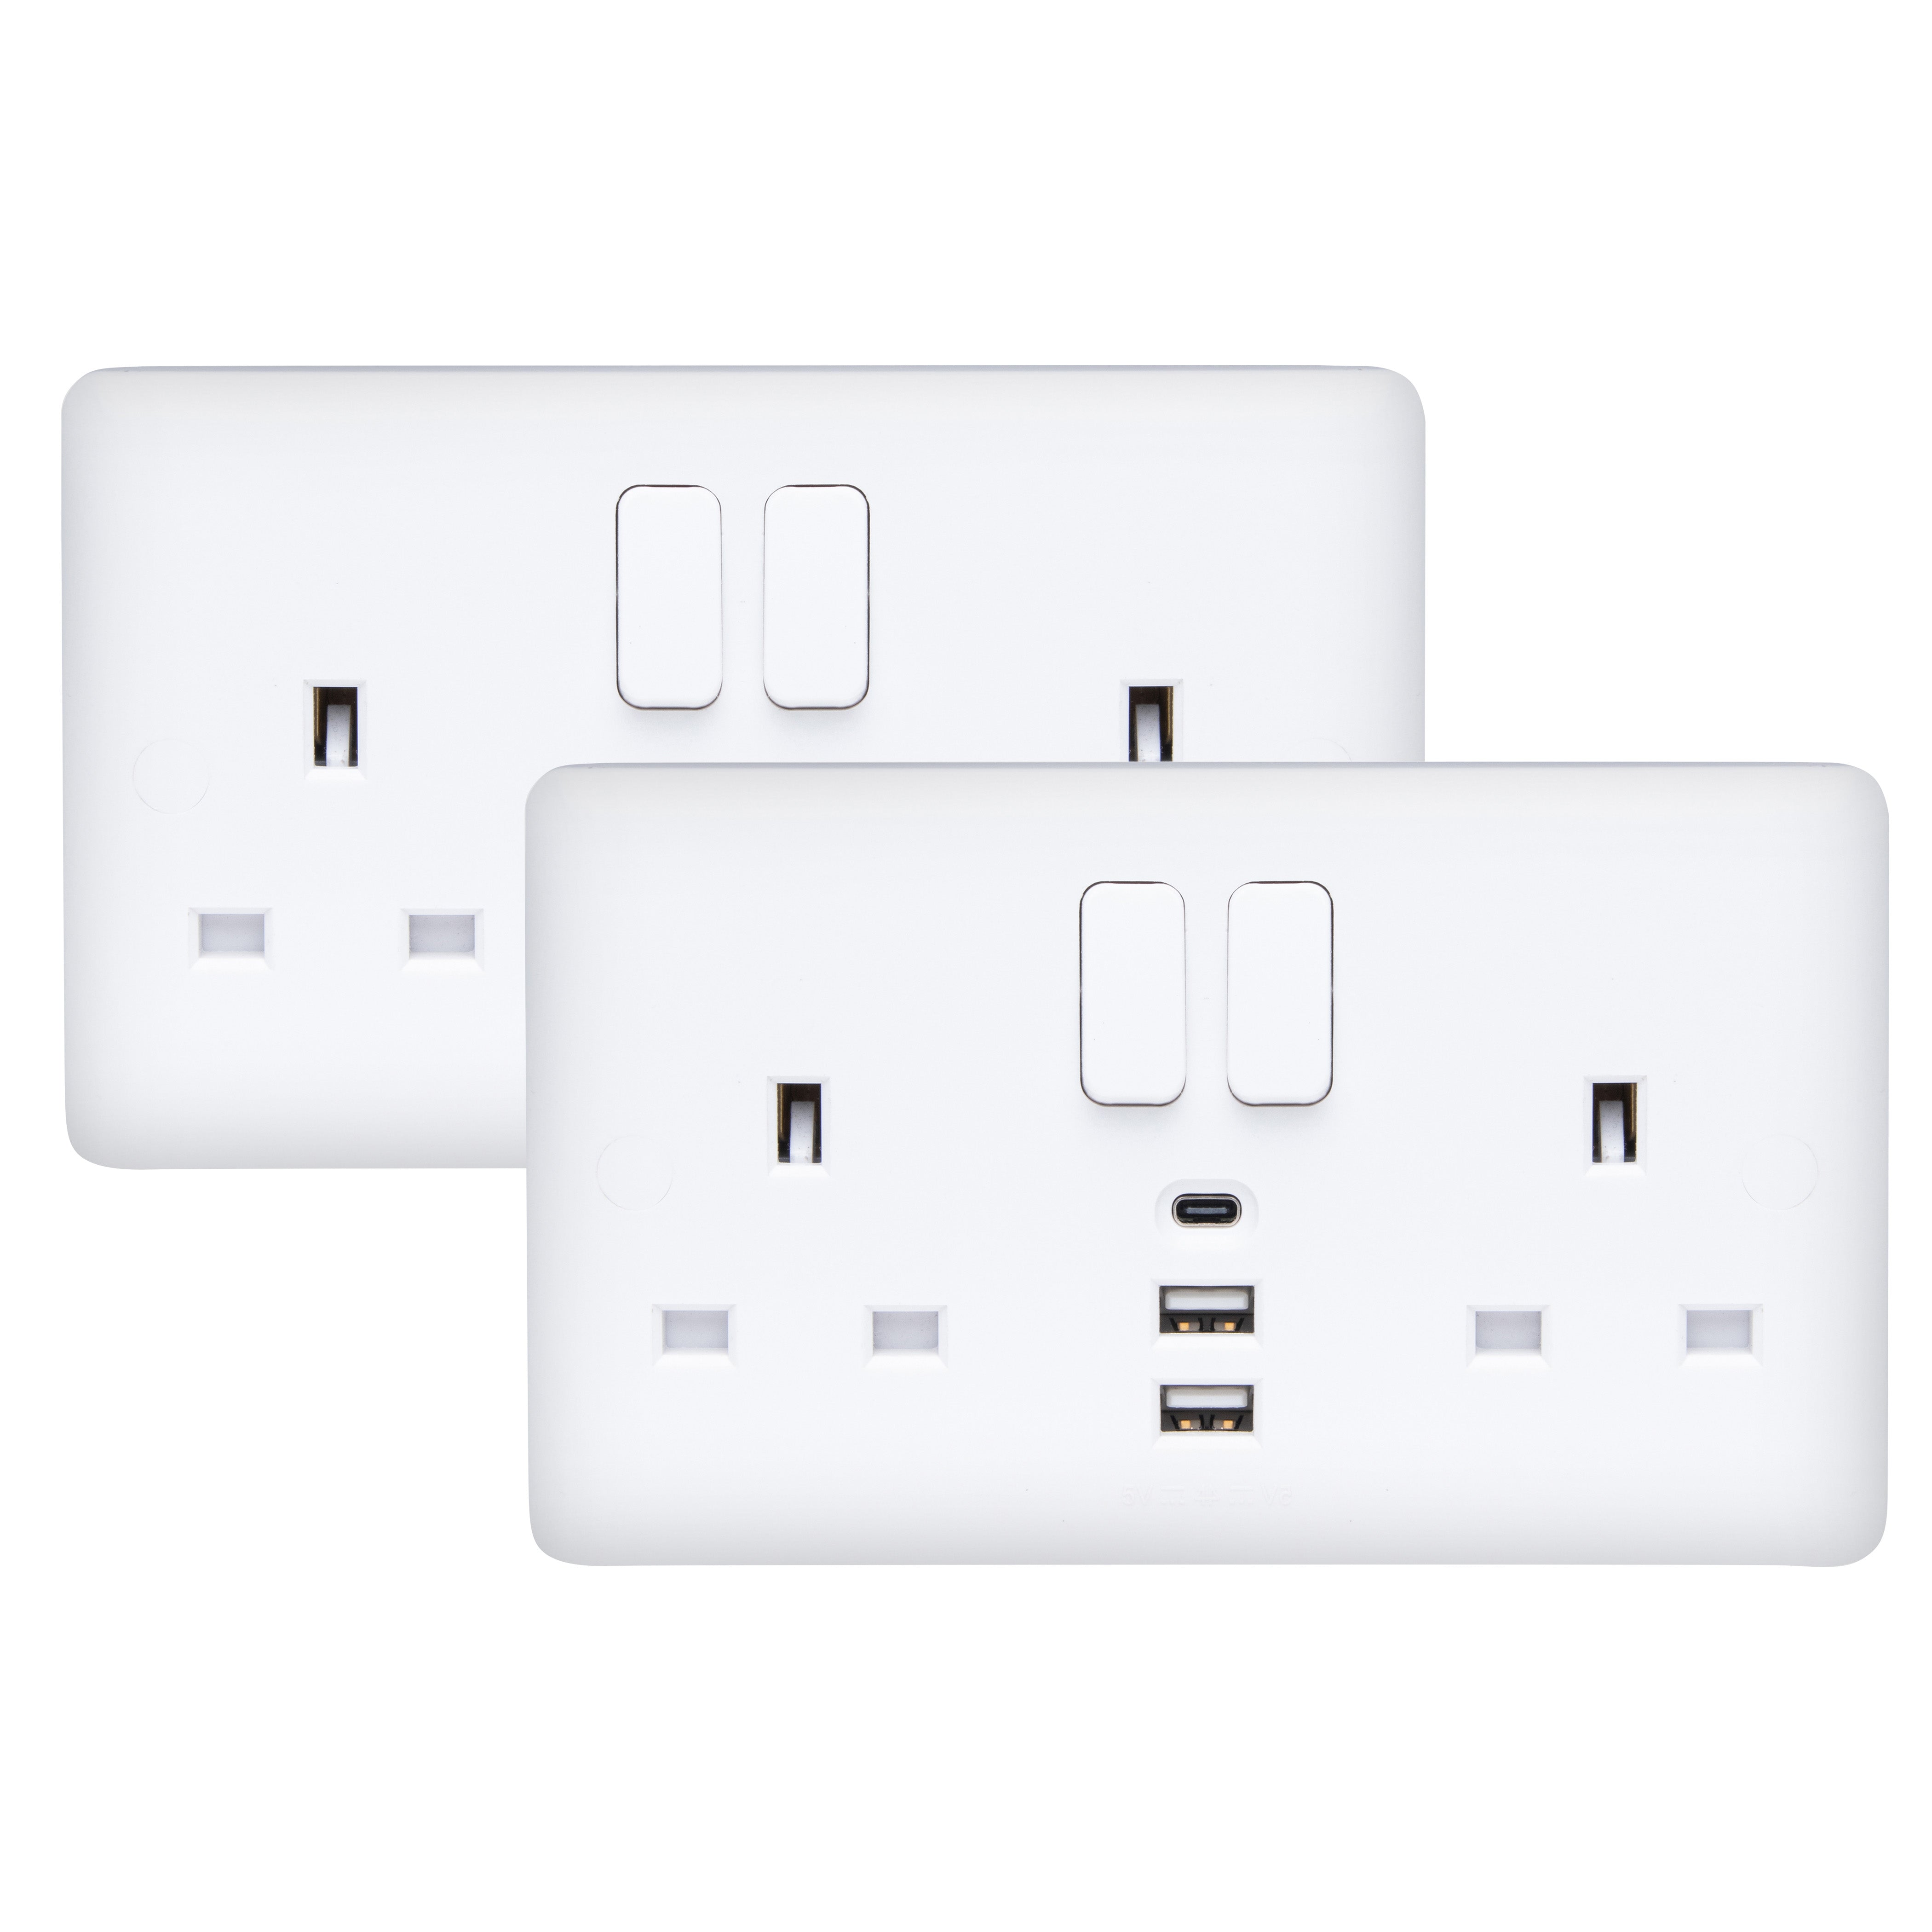 Deta 13A 2 Gang Switched Socket with 2x USB-A / 1x USB-C Ports (Pack of 2)